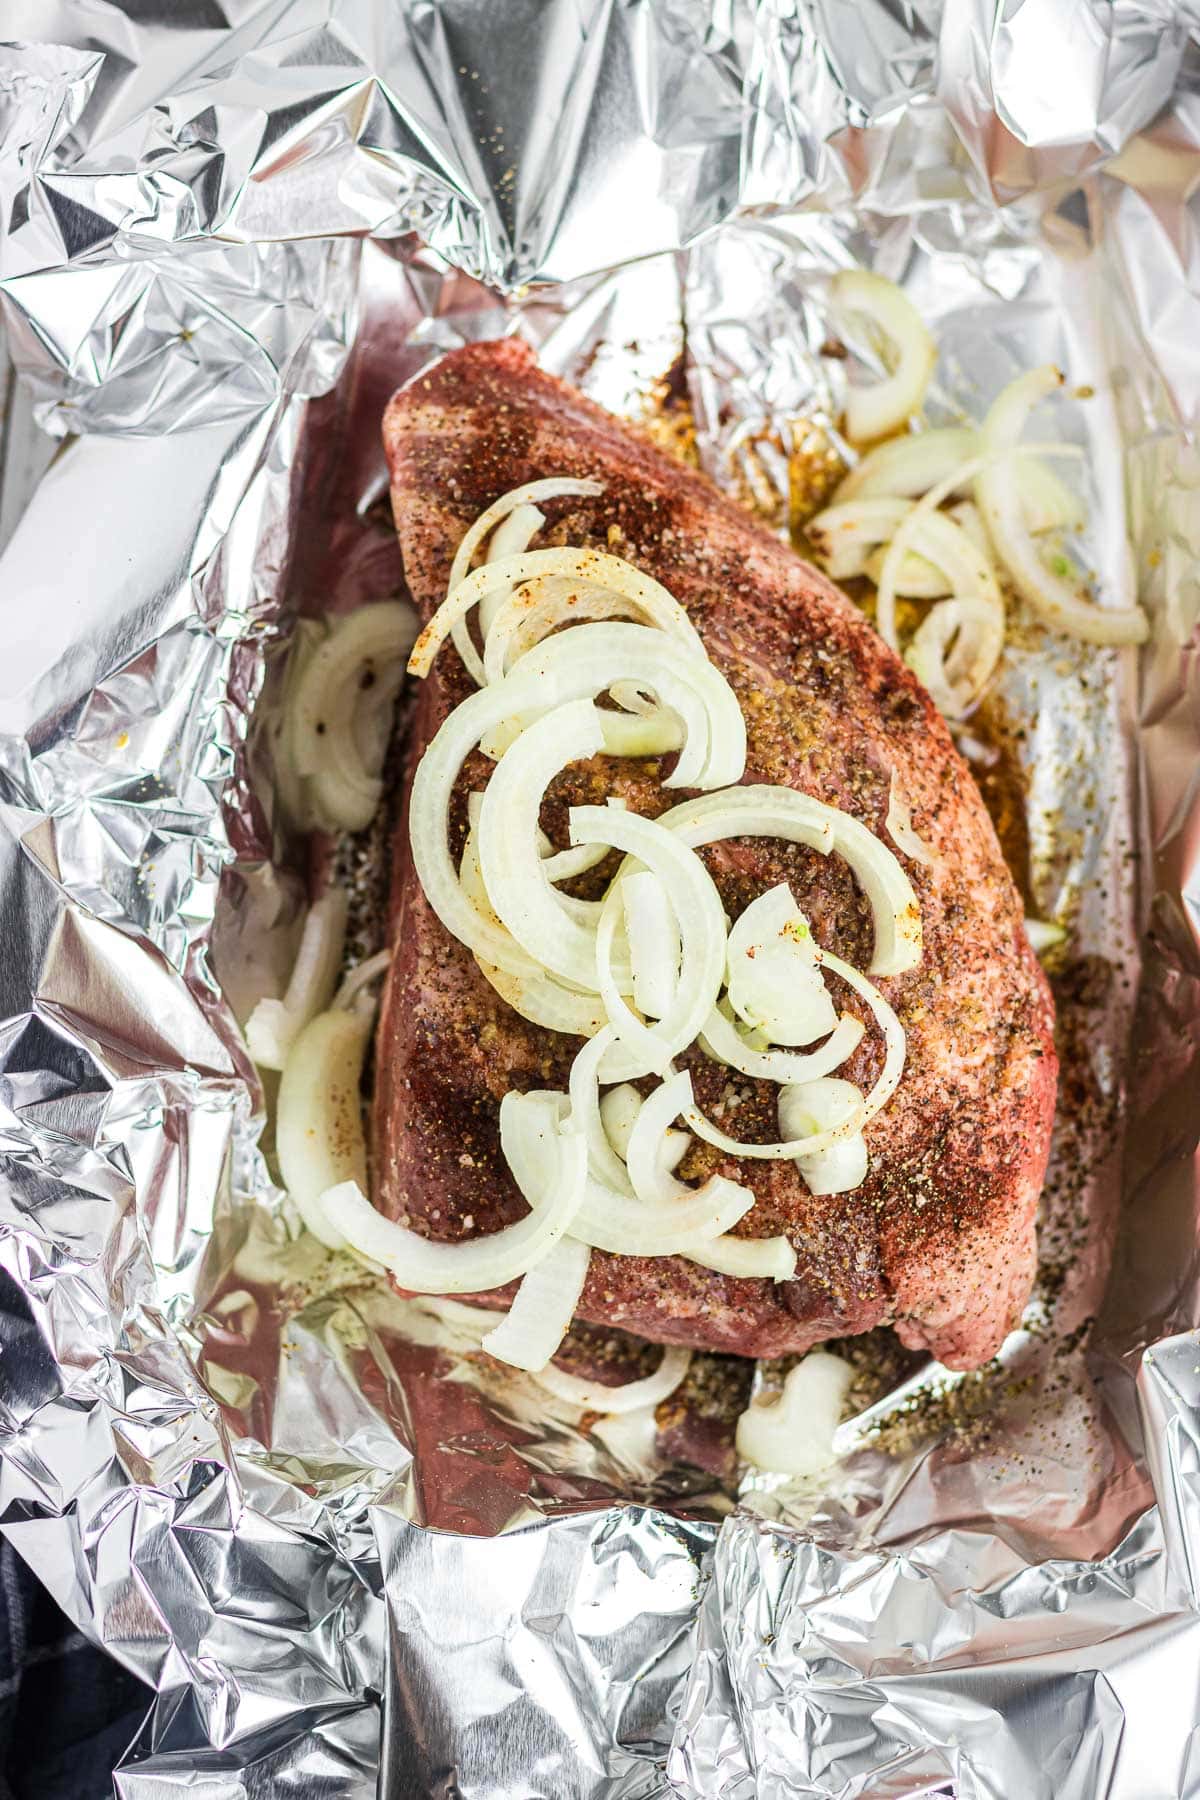 Brisket in foil with garlic and onions.